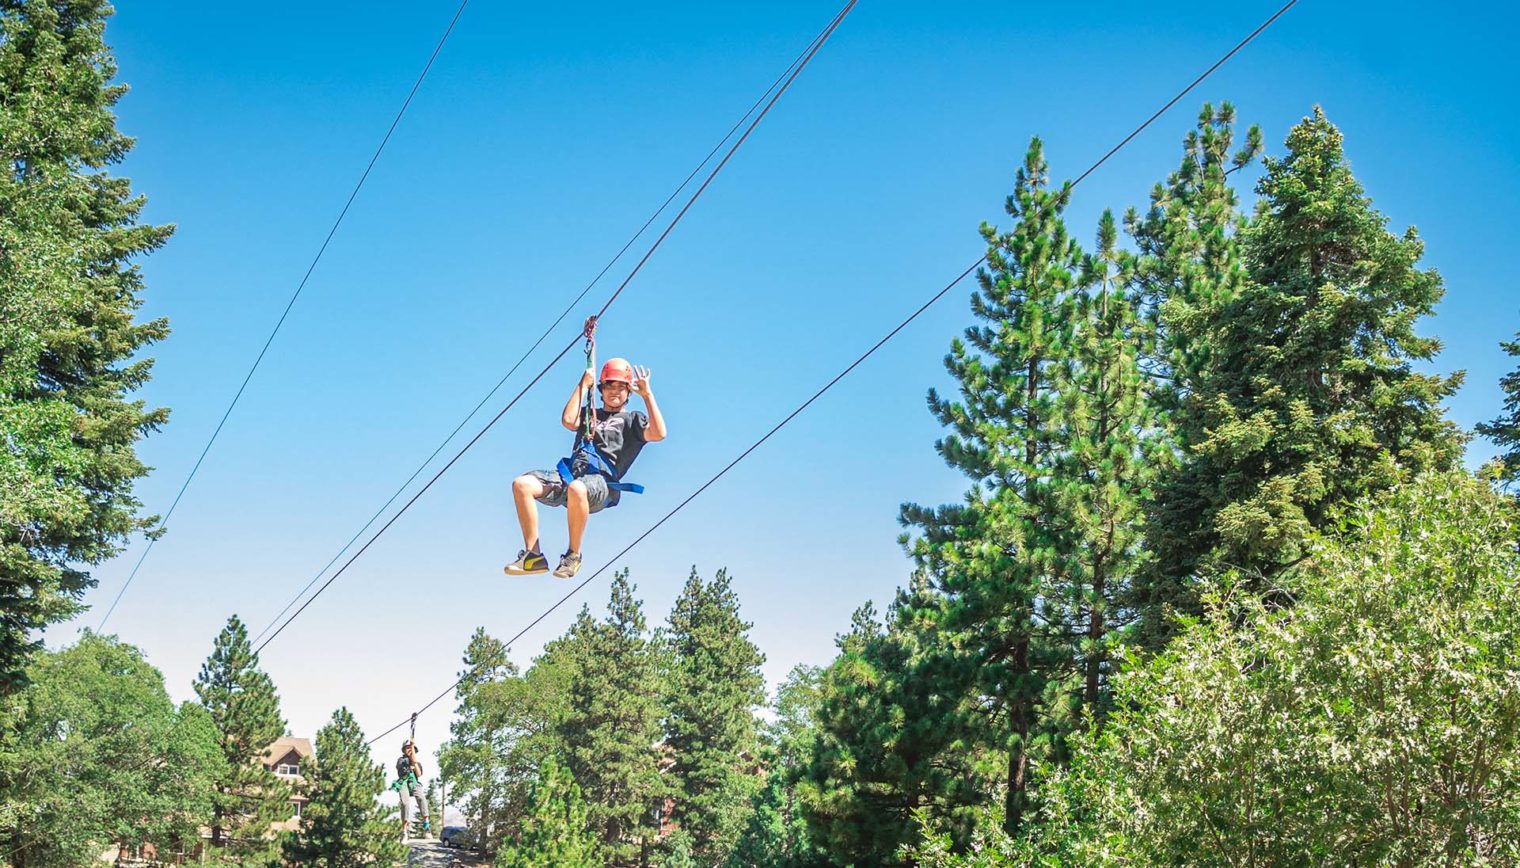 A person waving as they ride a zip line.